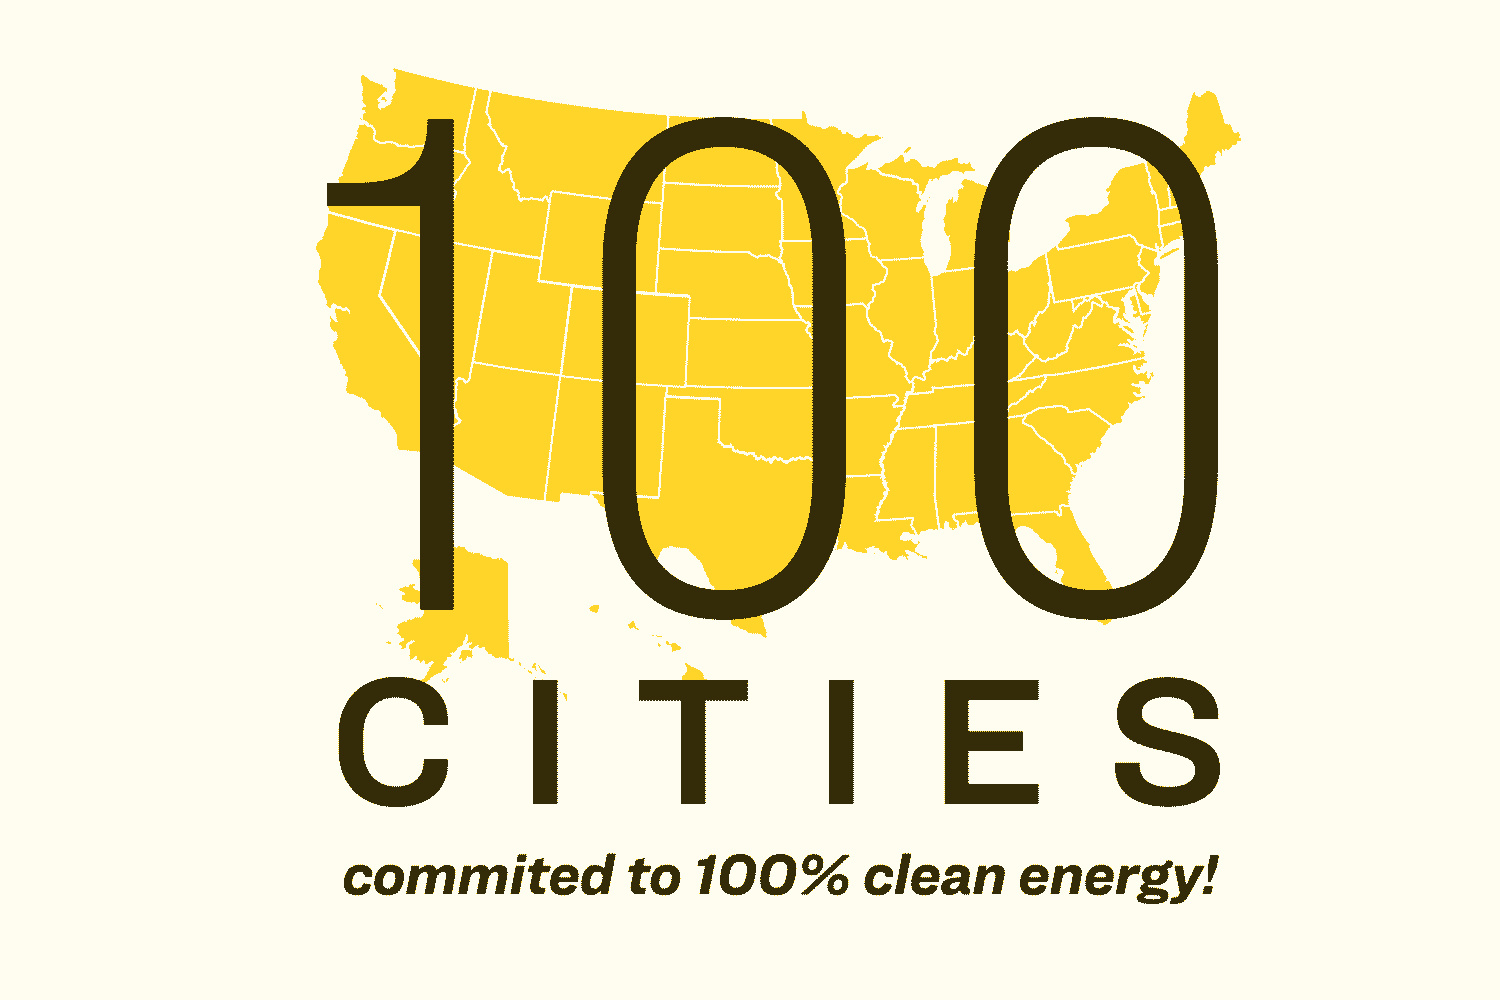 100 Cities’ Shared Vision: 100% Clean Energy For All